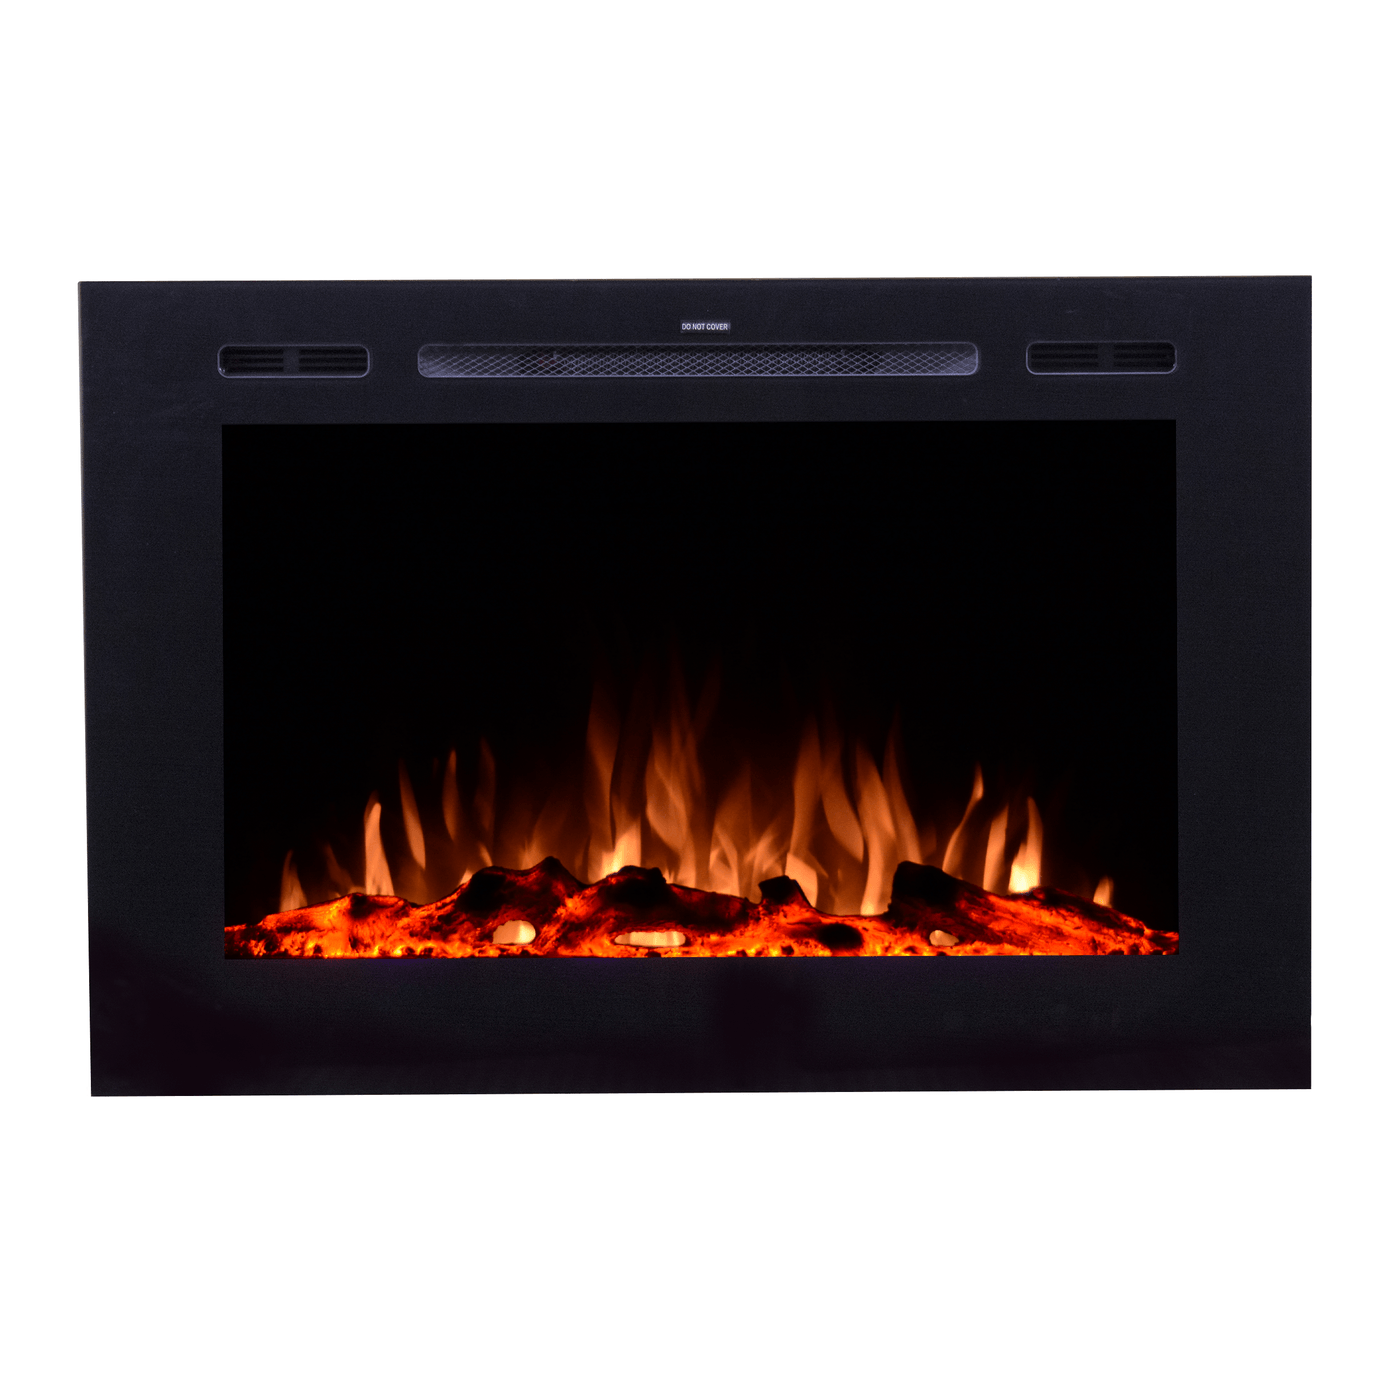 Touchstone Forte 80006 40" Recessed Electric Fireplace - TS-80006 - Avanquil